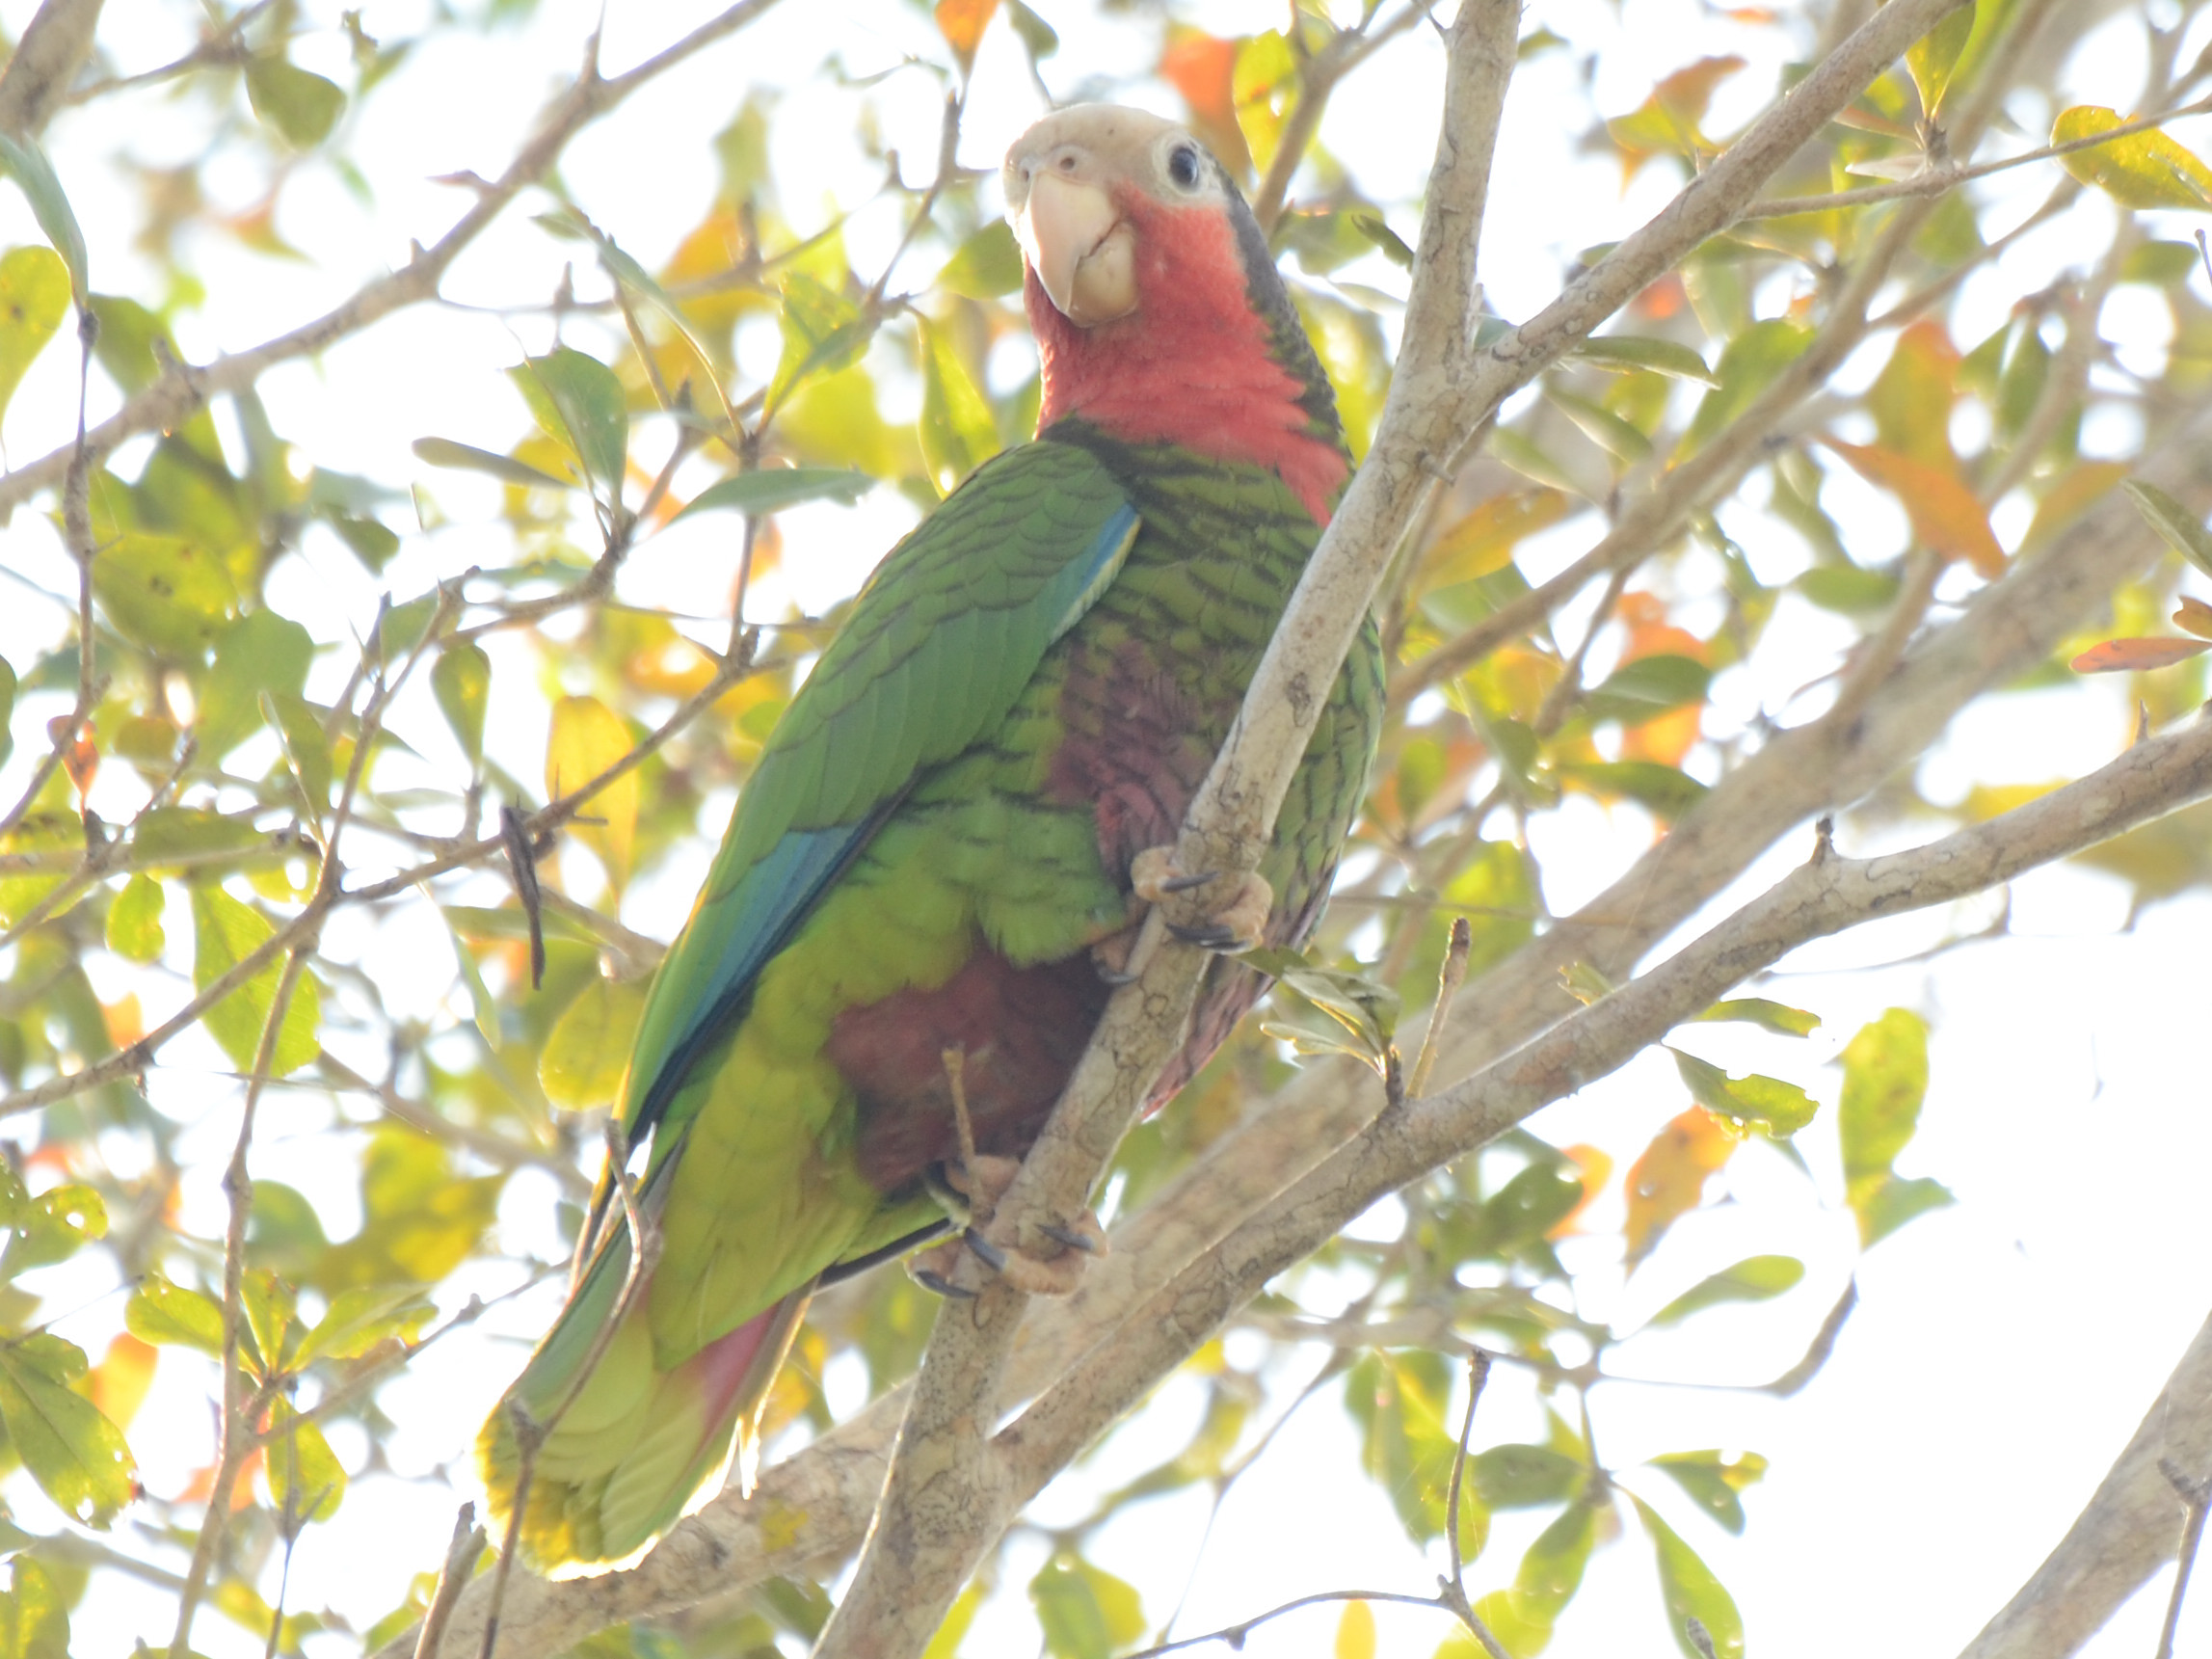 Click picture to see more  Cuban Parrots.